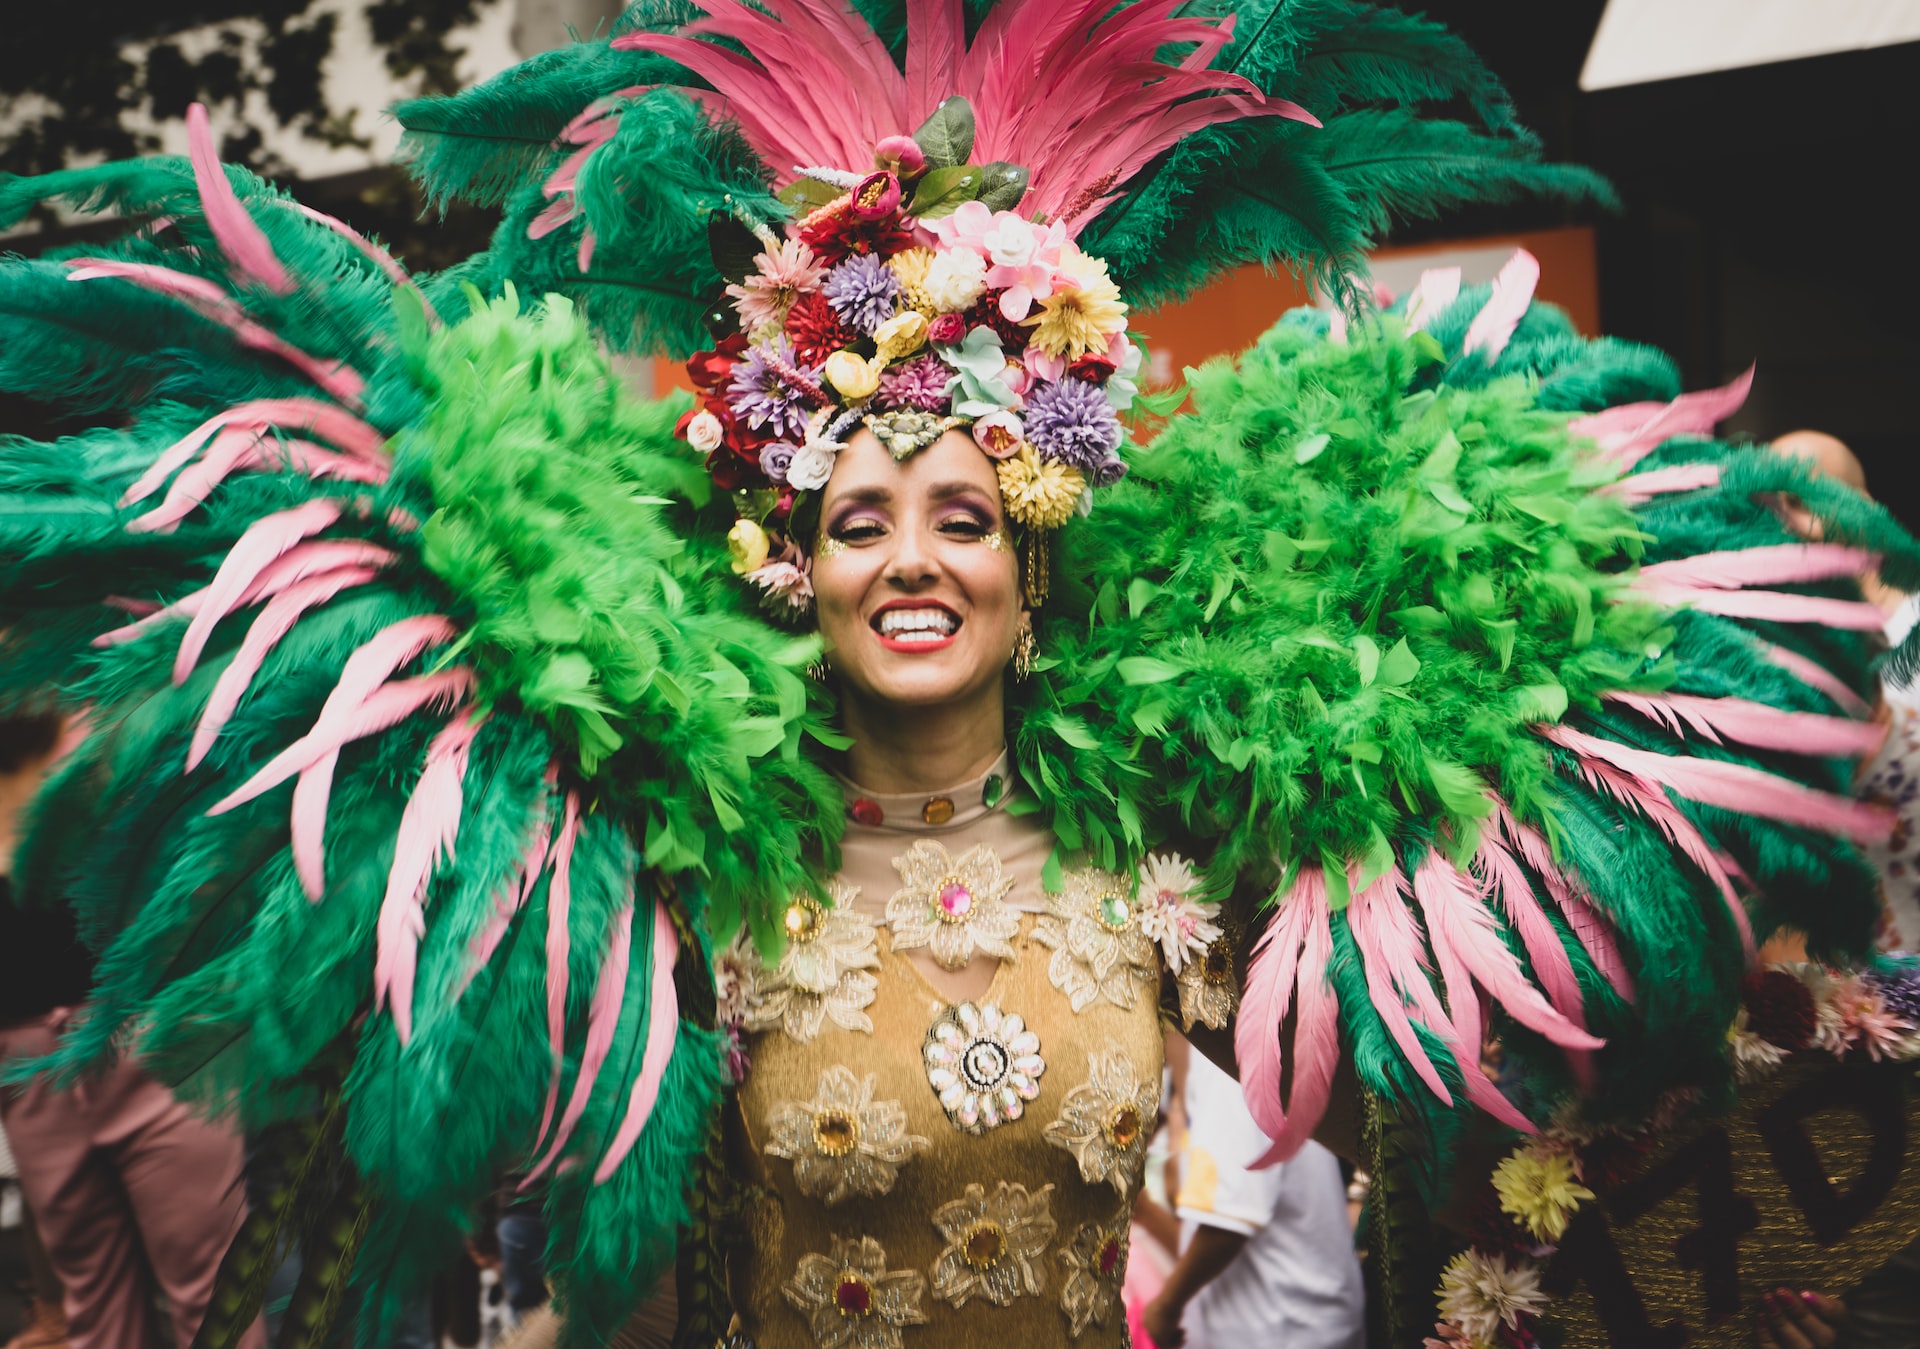 A woman wearing an elaborate feather boa and crown.